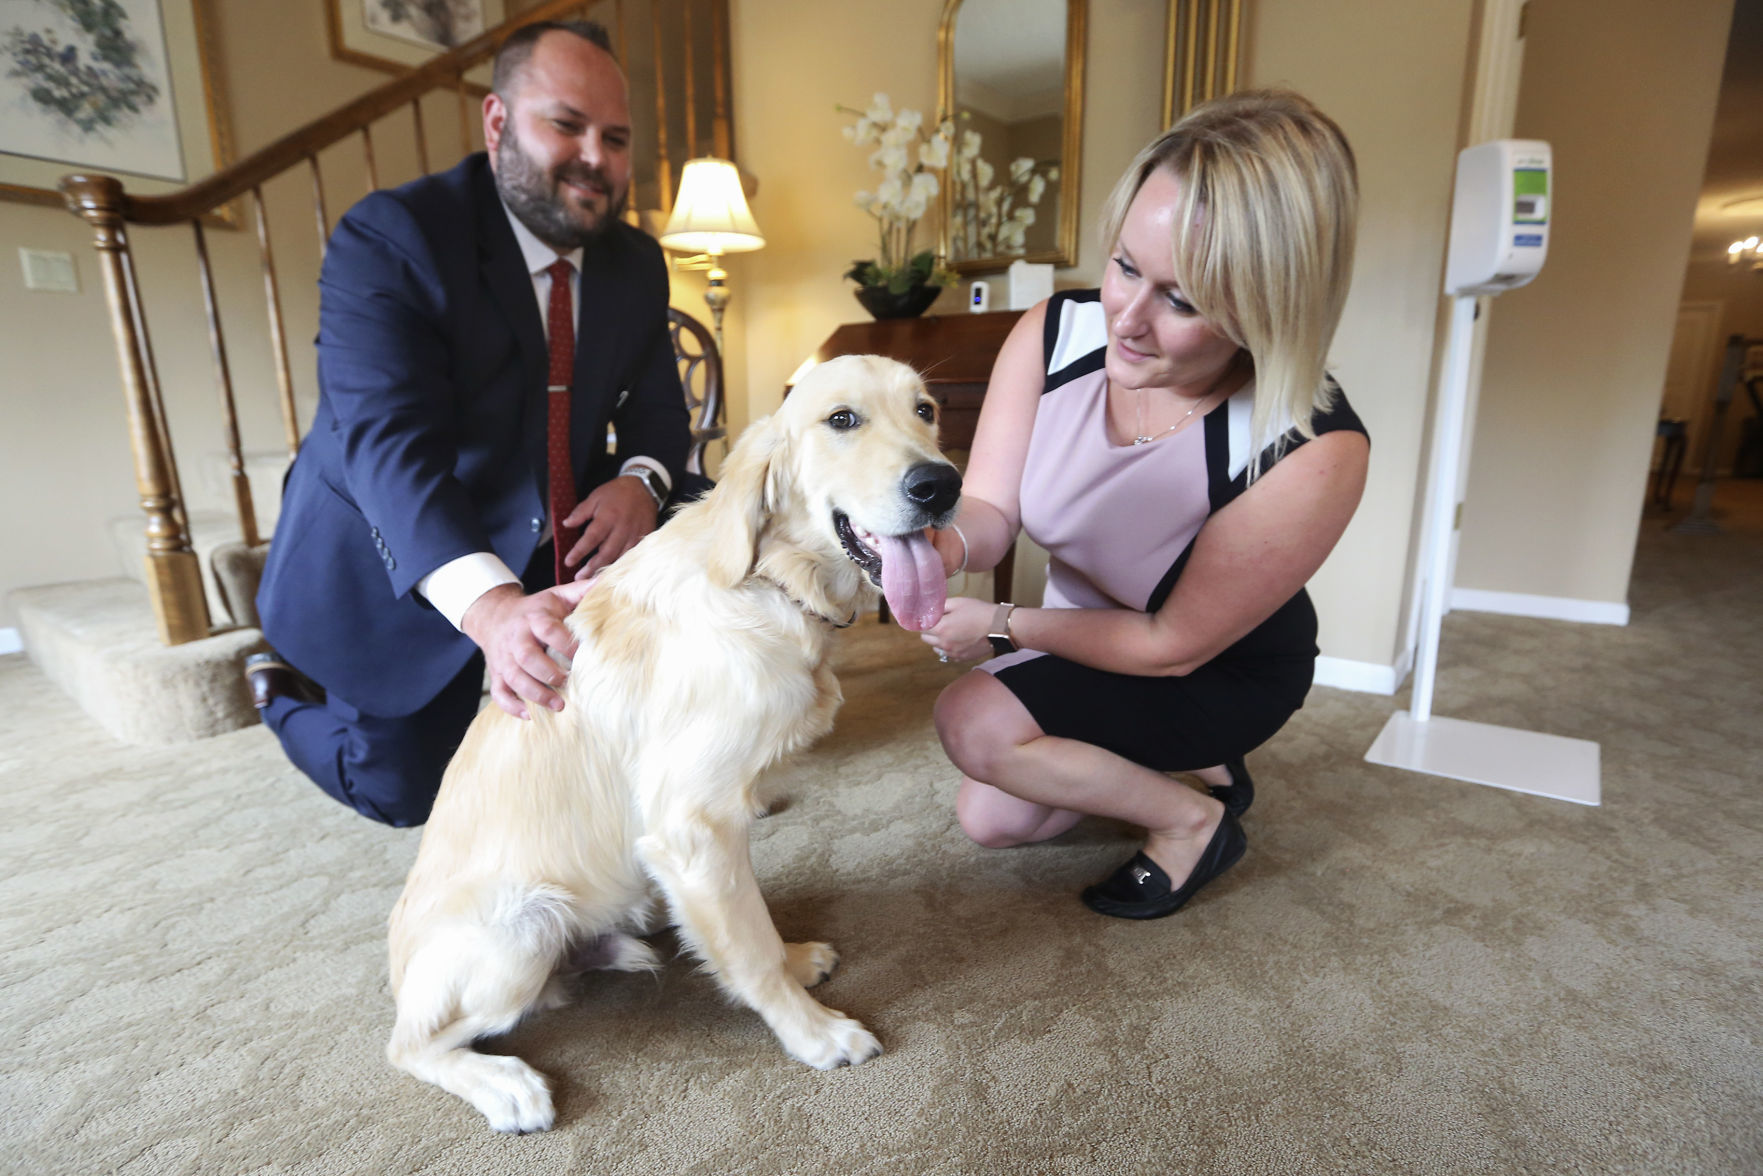 Managing Funeral Director Scott Glover and Office Manager Samantha Glover play with their dog, Stanley, at Hoffmann Schneider & Kitchen Funeral Home and Cremation Service in Dubuque on Friday. Stanley is an English golden retriever and comes to the business to provide stress relief for employees and visitors. PHOTO CREDIT: NICKI KOHL